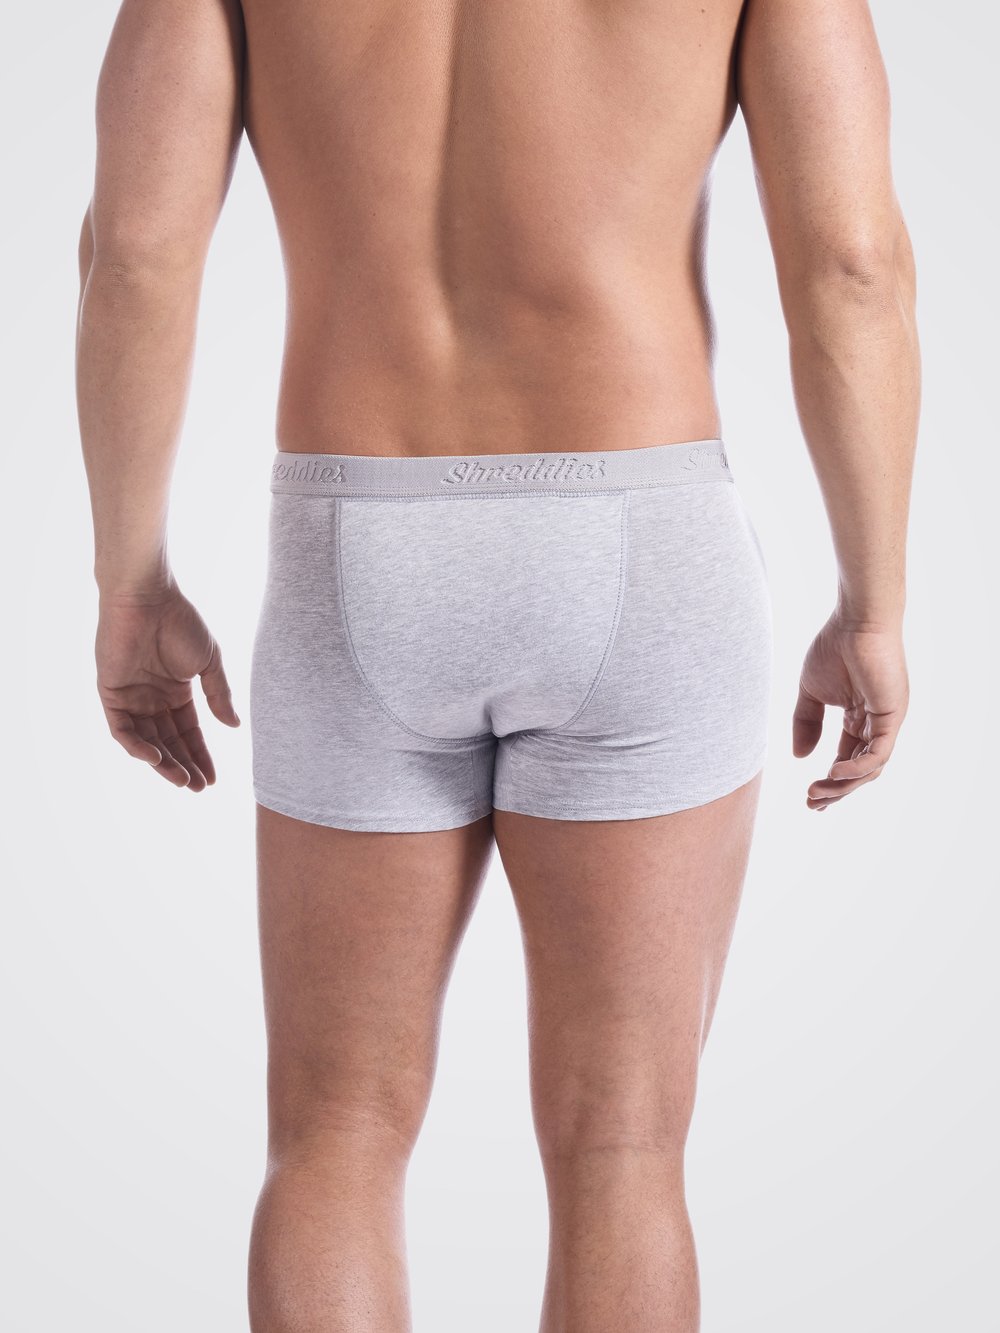 Men's hipster boxers